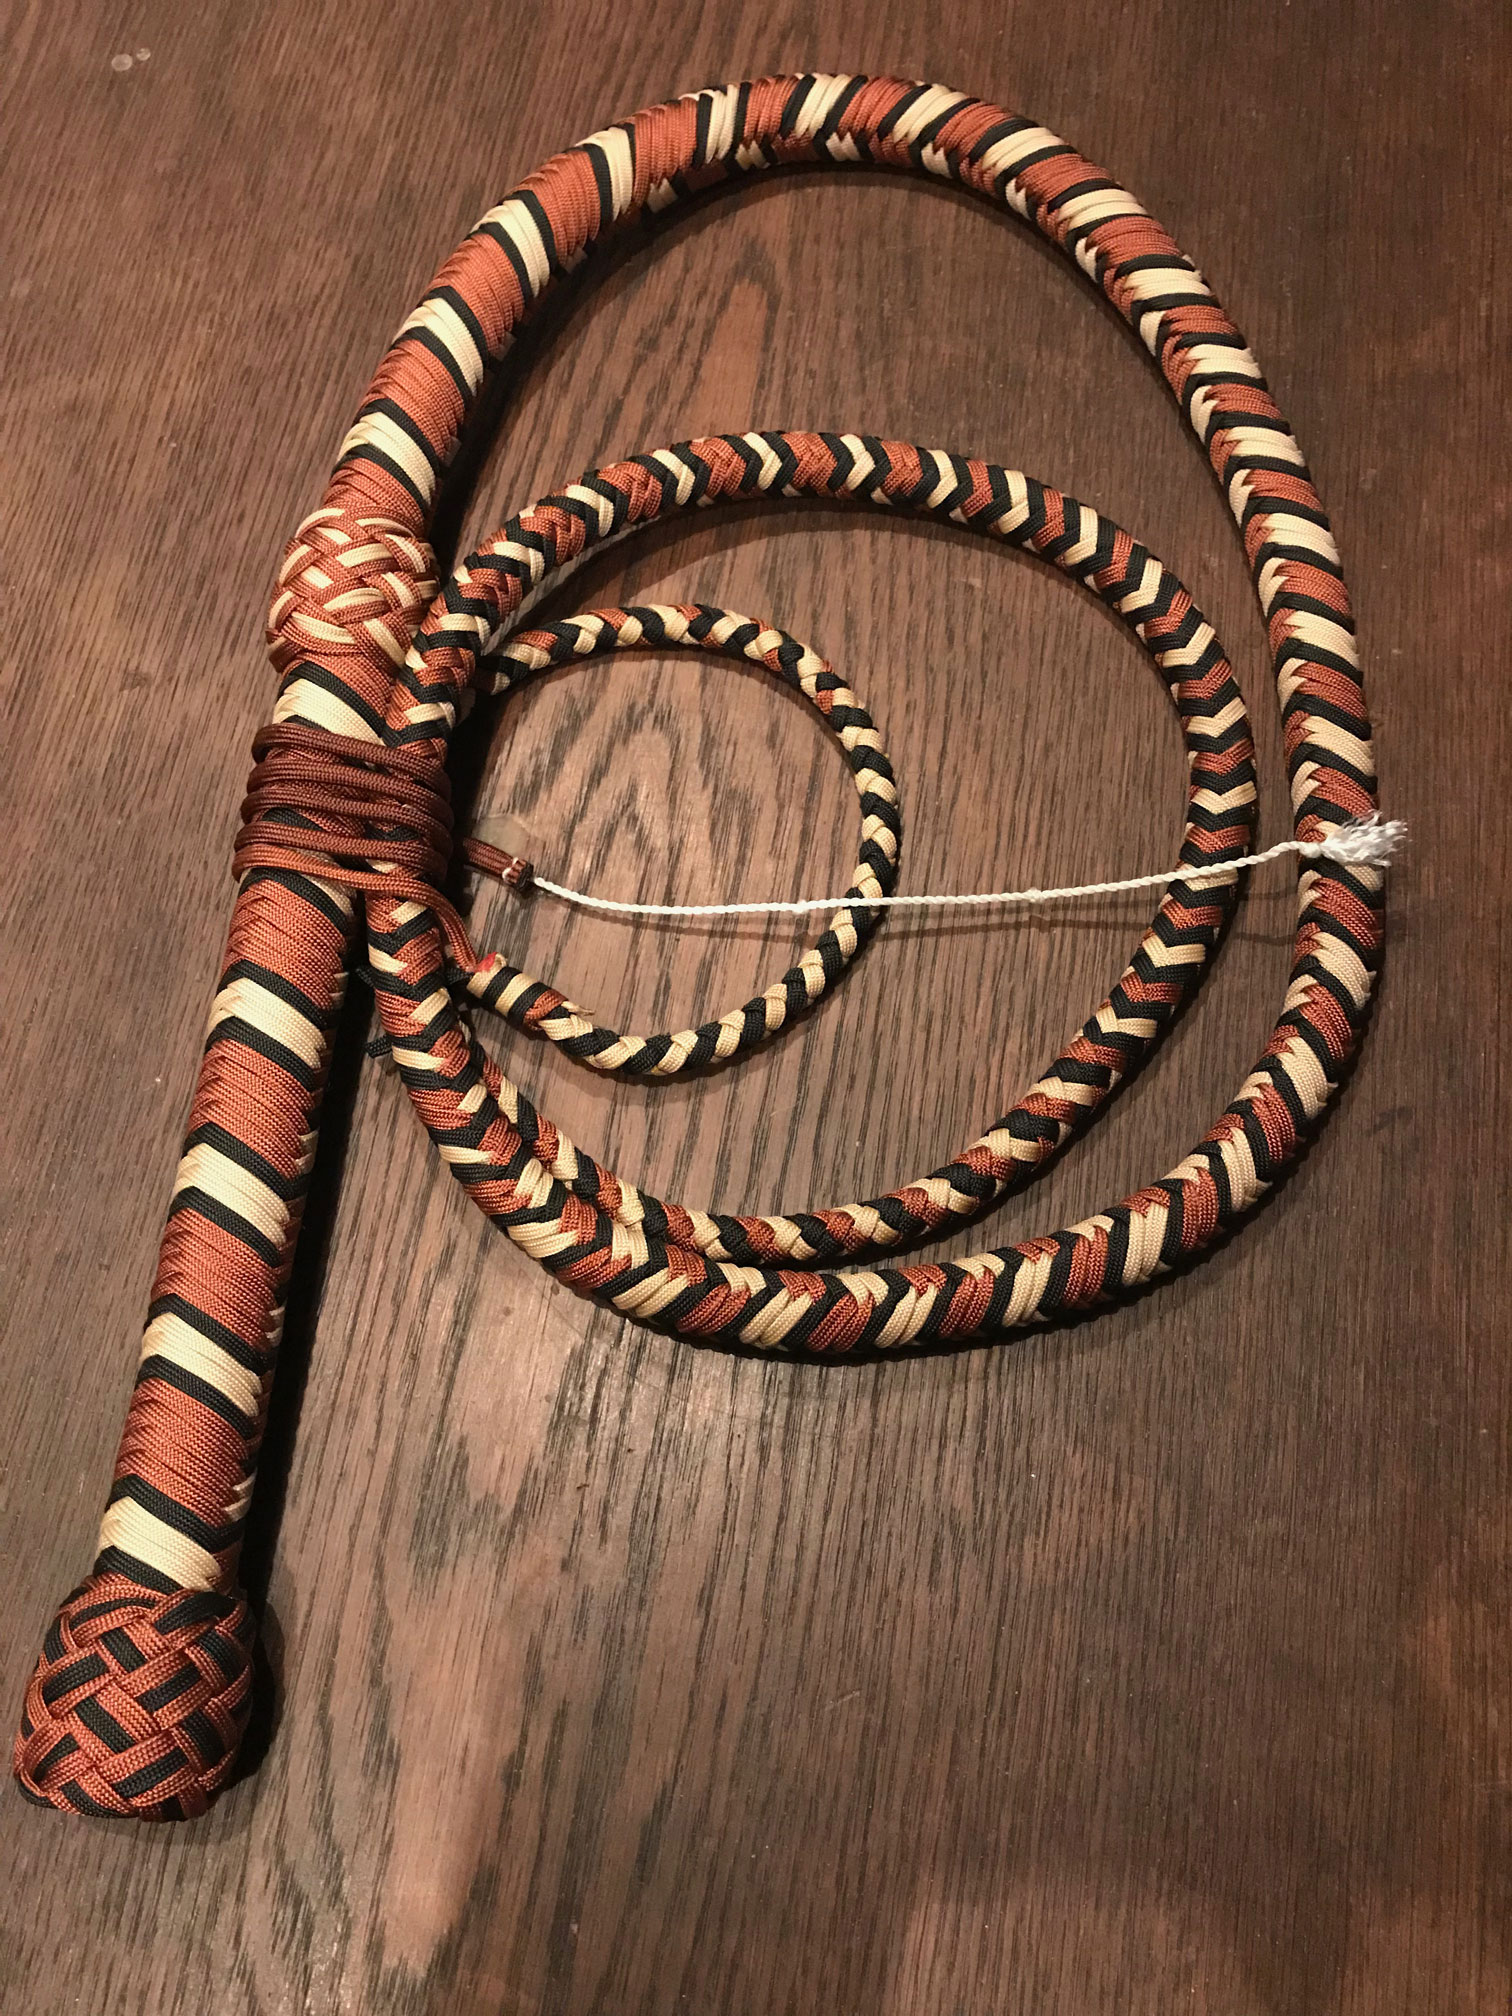 8ft. Paracord